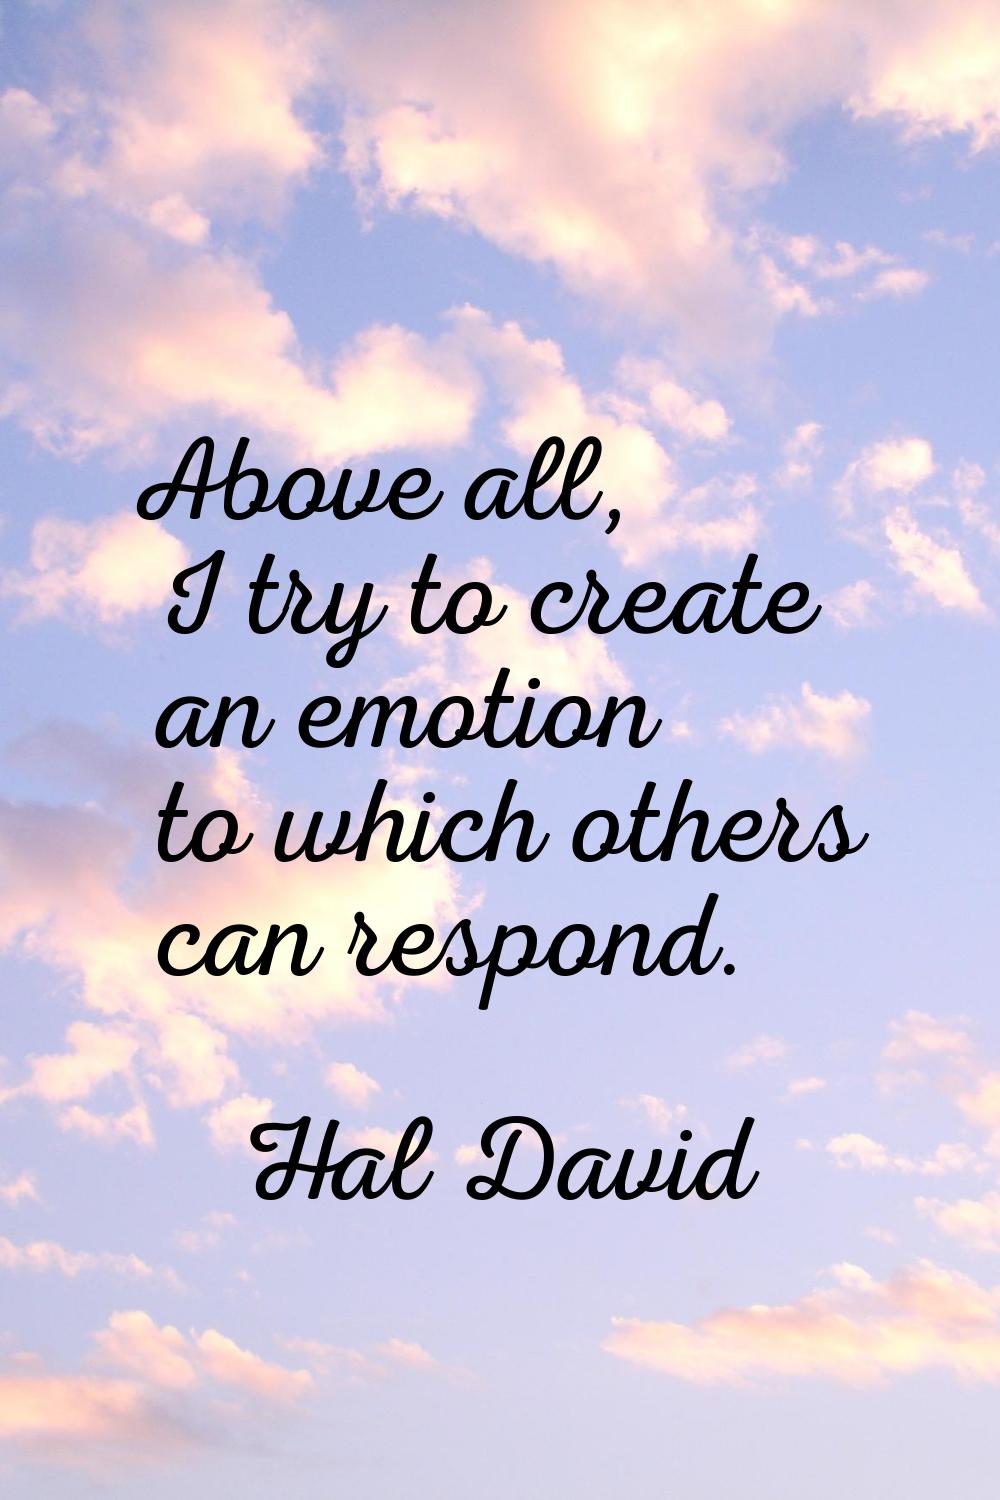 Above all, I try to create an emotion to which others can respond.